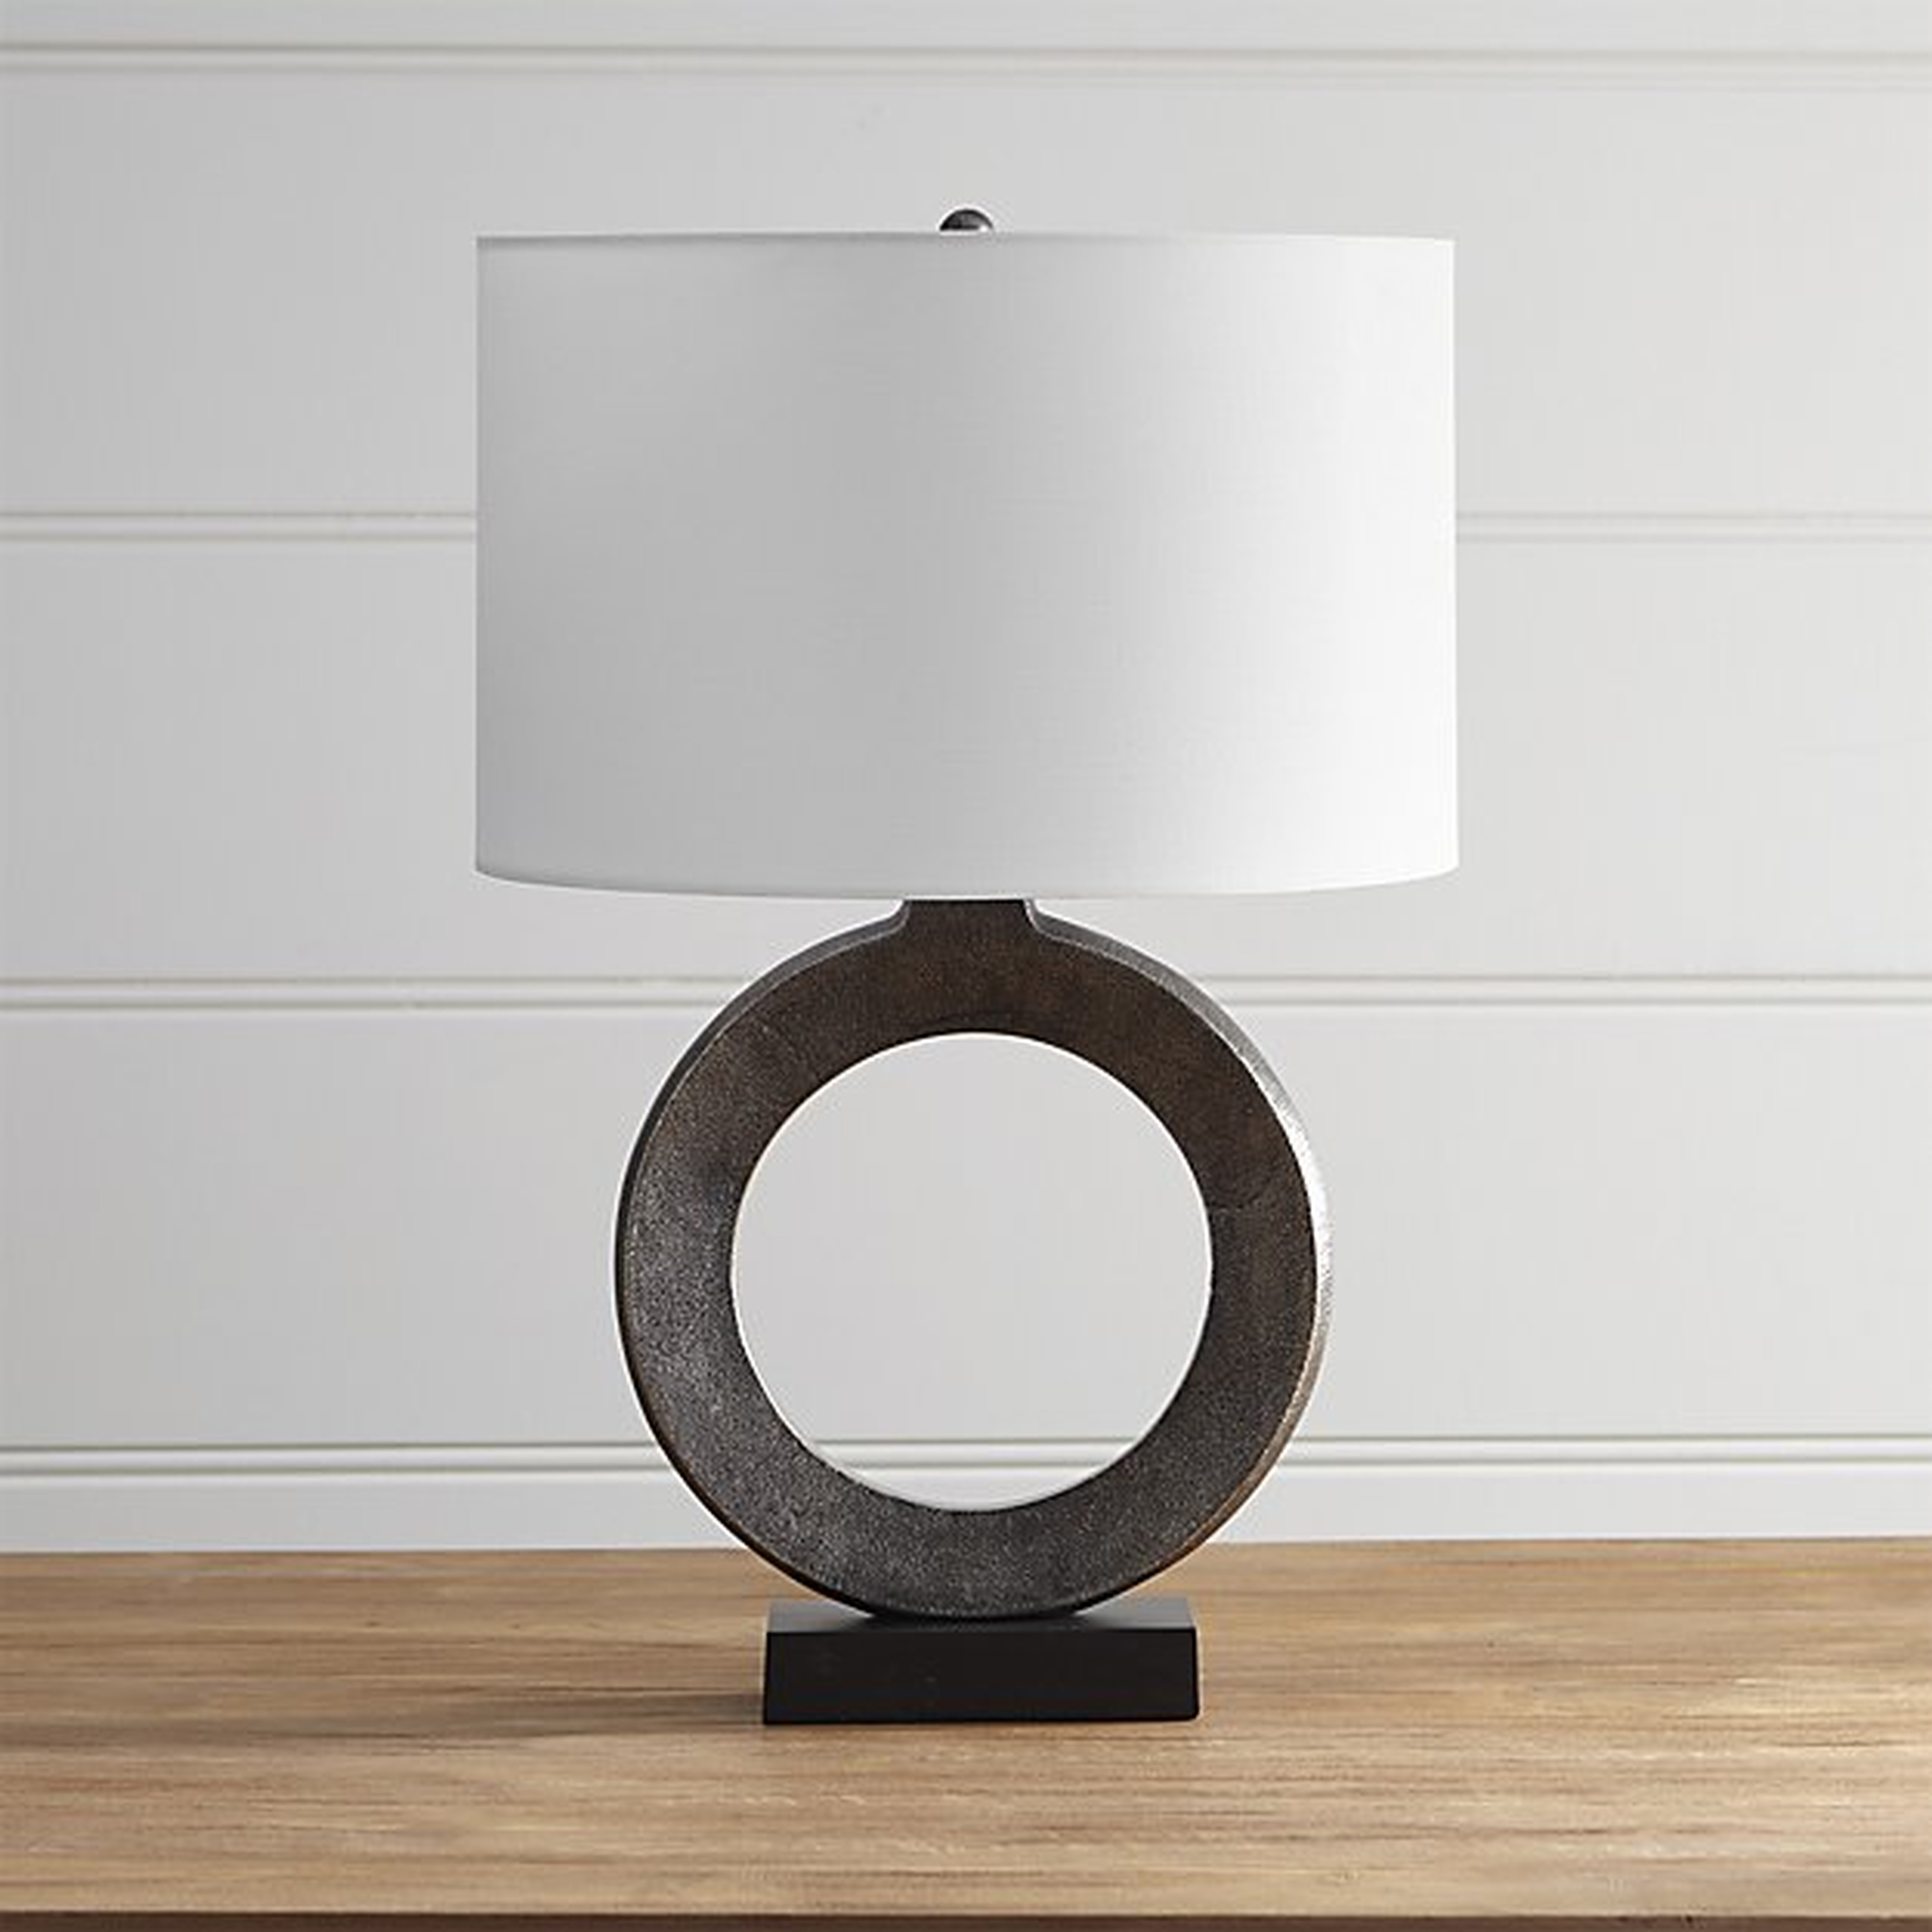 Crest Silver Table Lamp with White Shade - Crate and Barrel